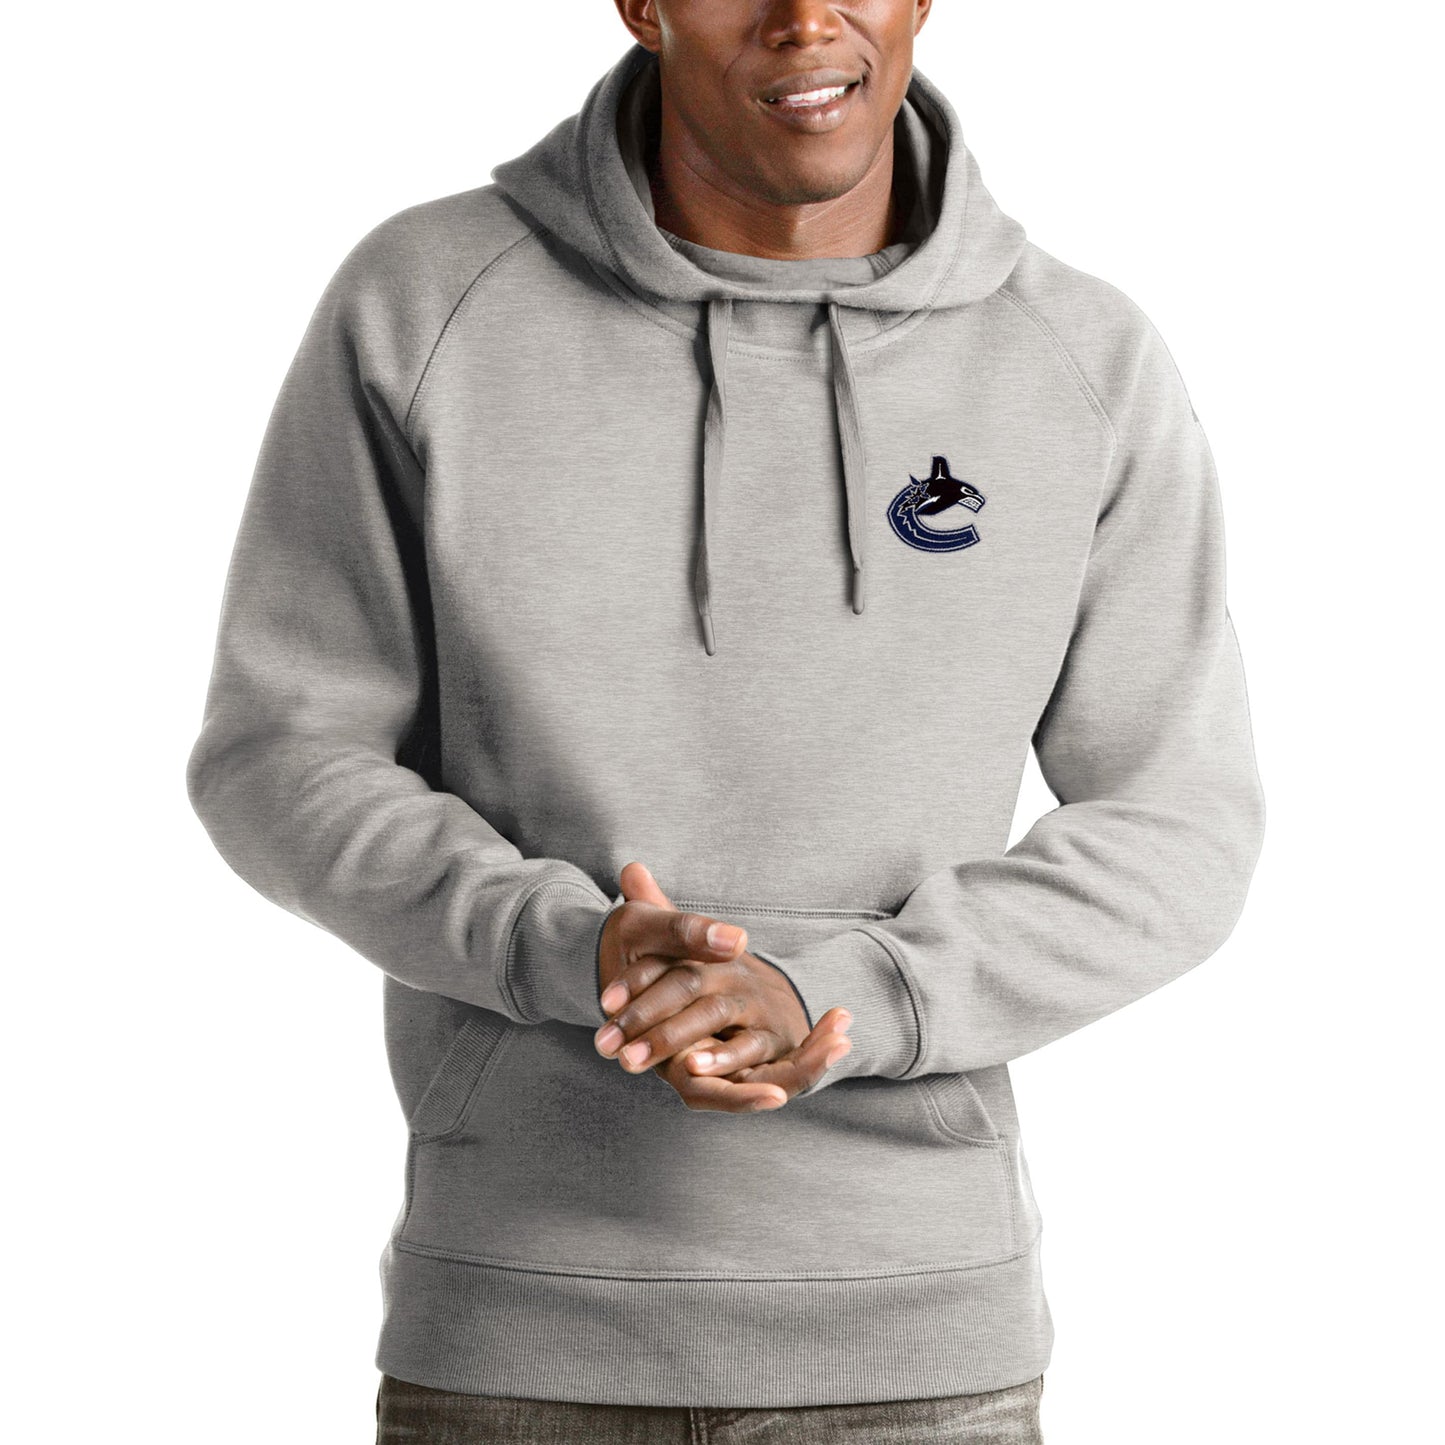 Men's Antigua Heathered Gray Vancouver Canucks Victory Pullover Hoodie